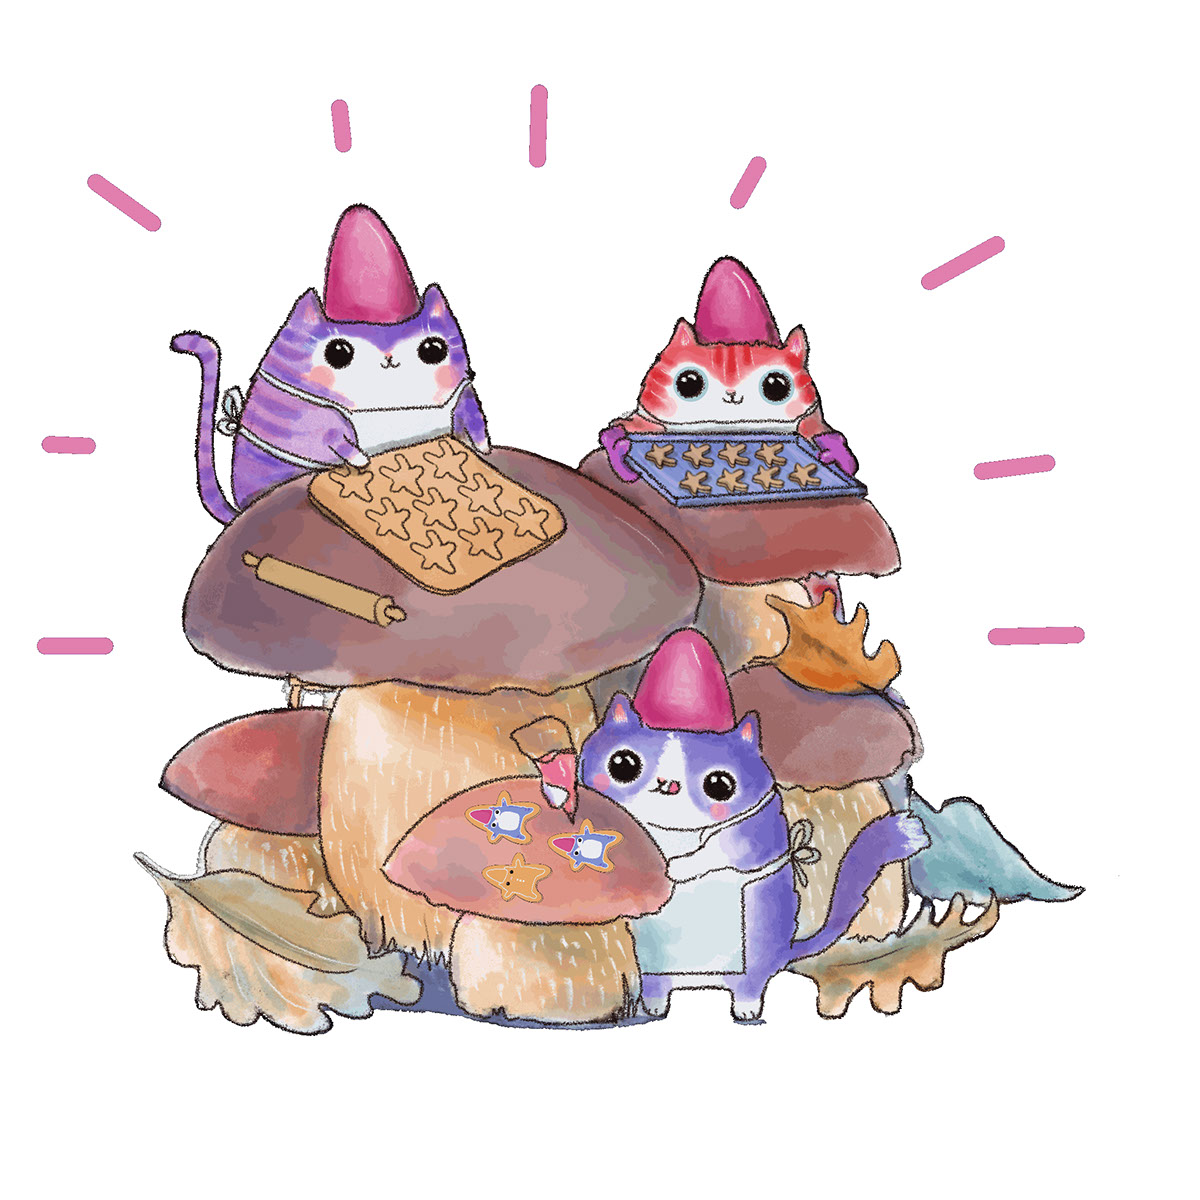 Gnome cats rendition image